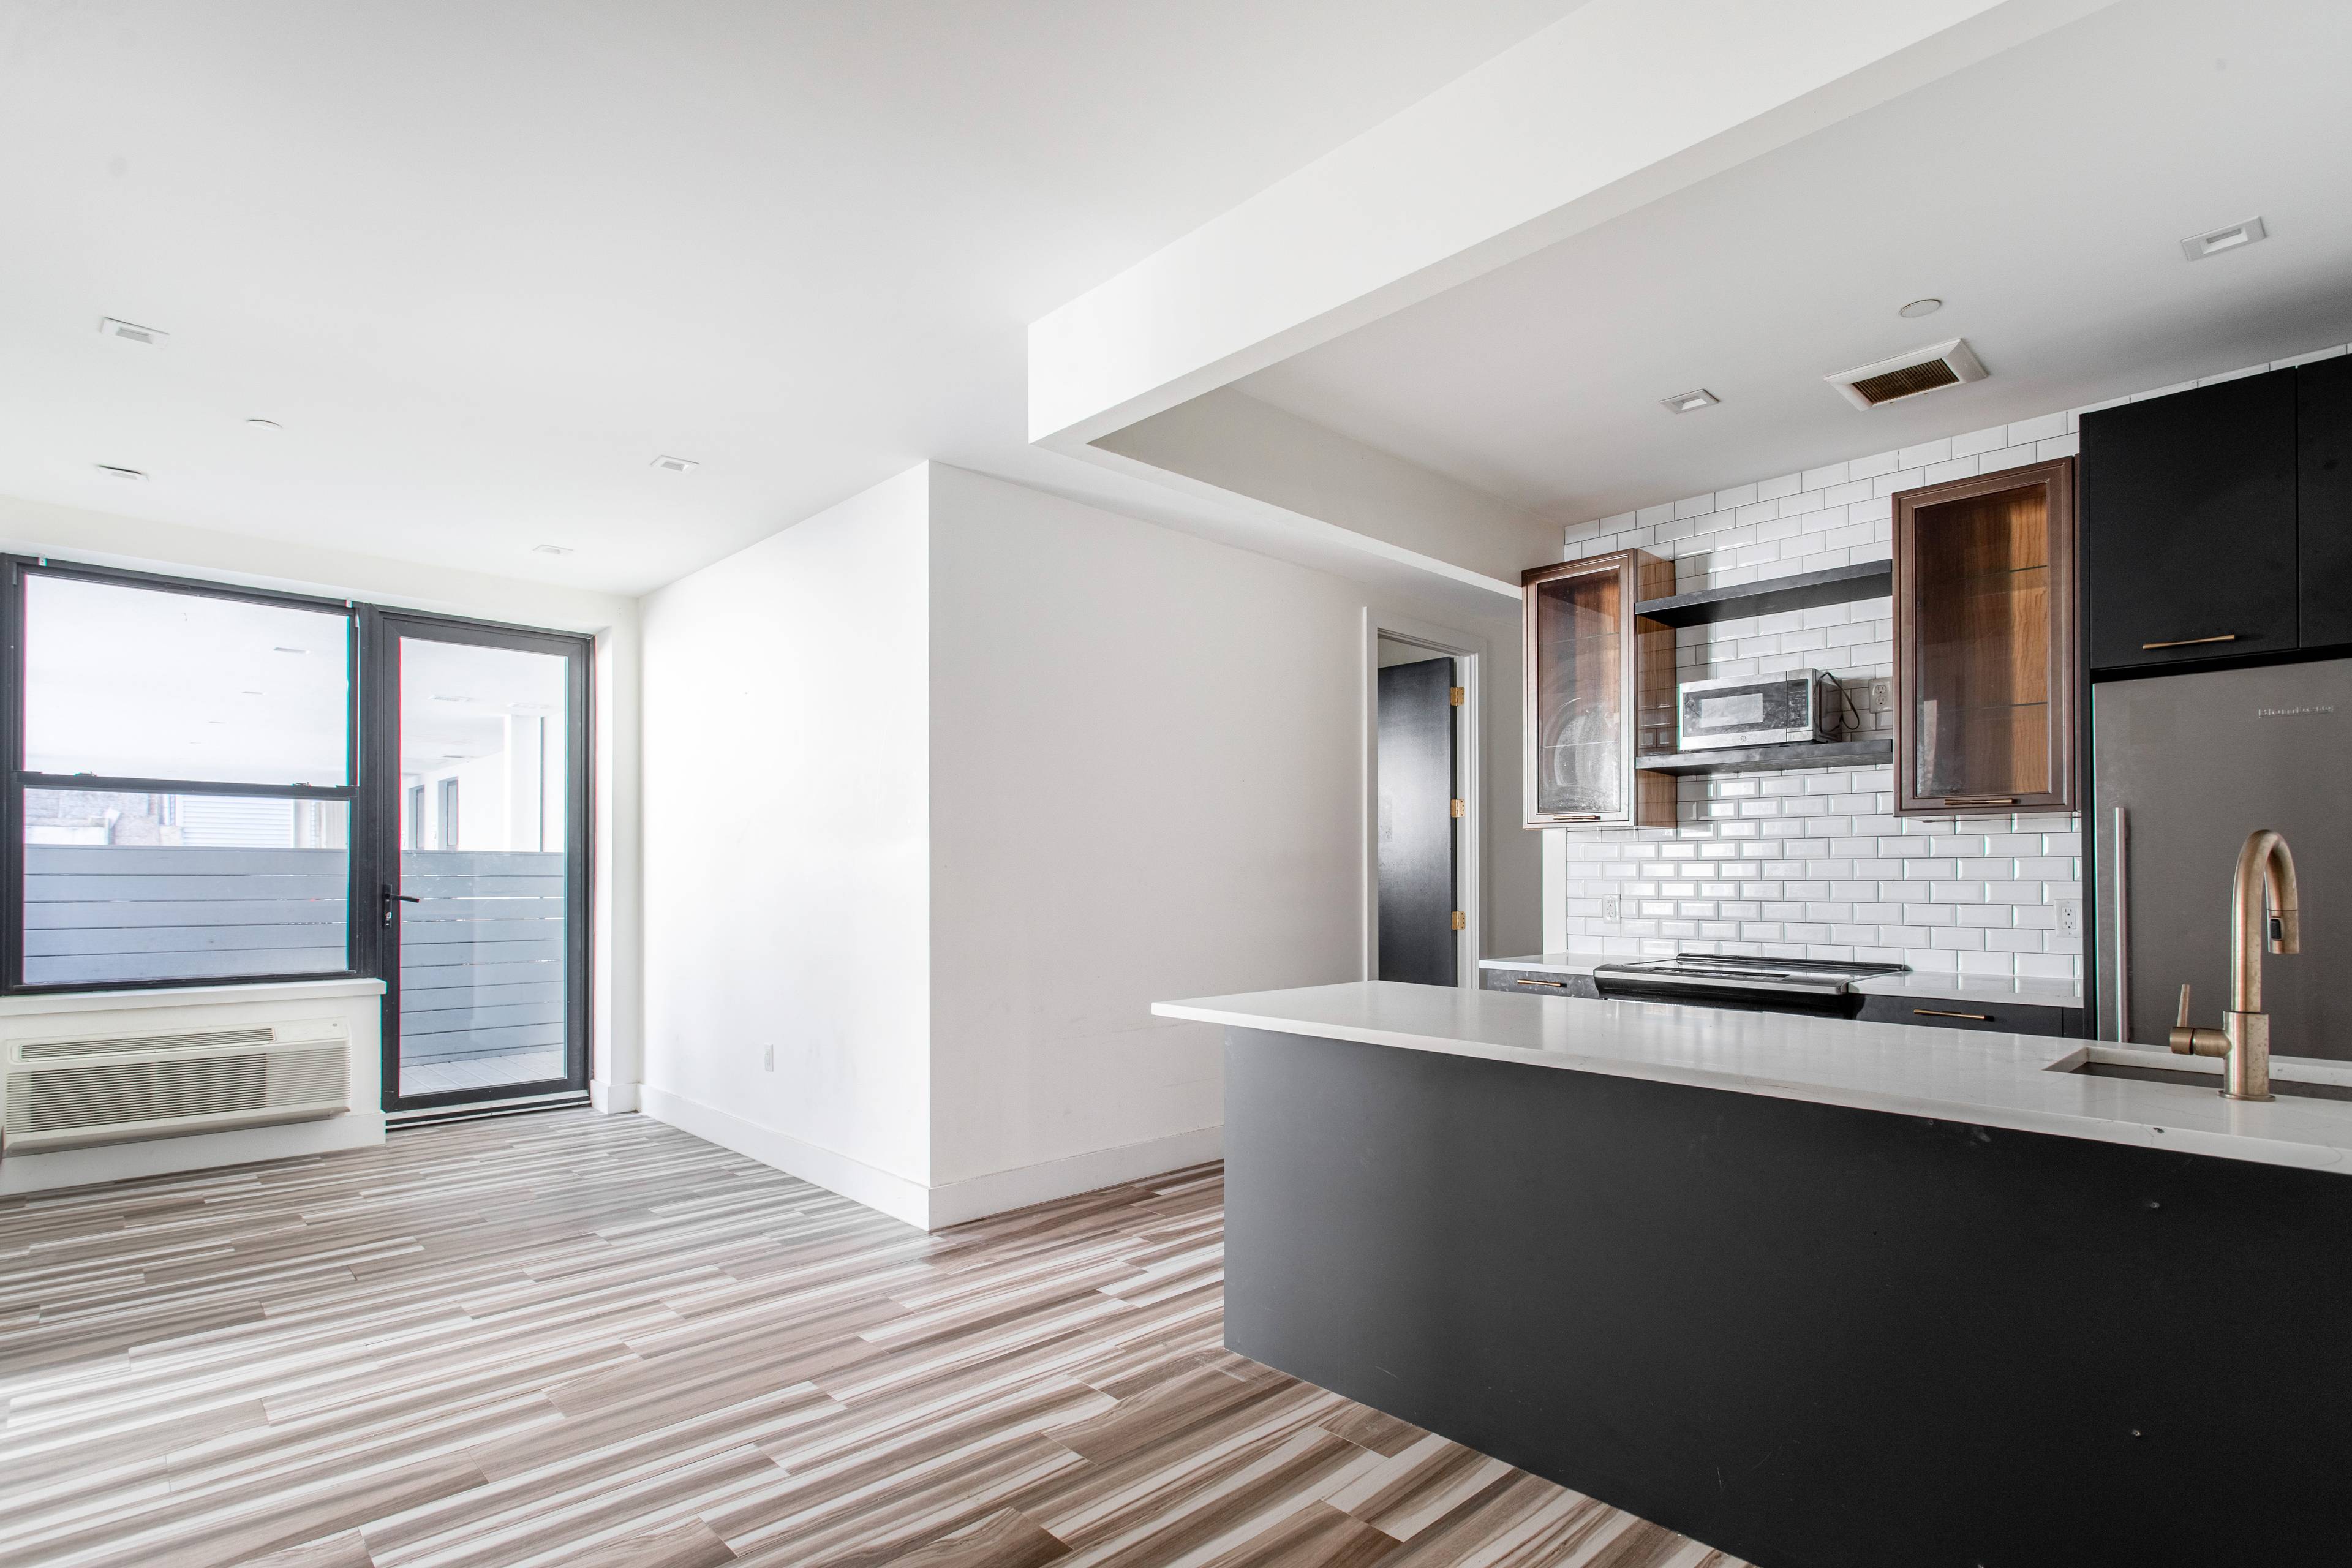 OFFERING 2 MONTHS FREE RENT Residence 1A at 709 Hart Street presents a well appointed contemporary three bedroom, one and one half bathroom generous layout with large private outdoor deck ...